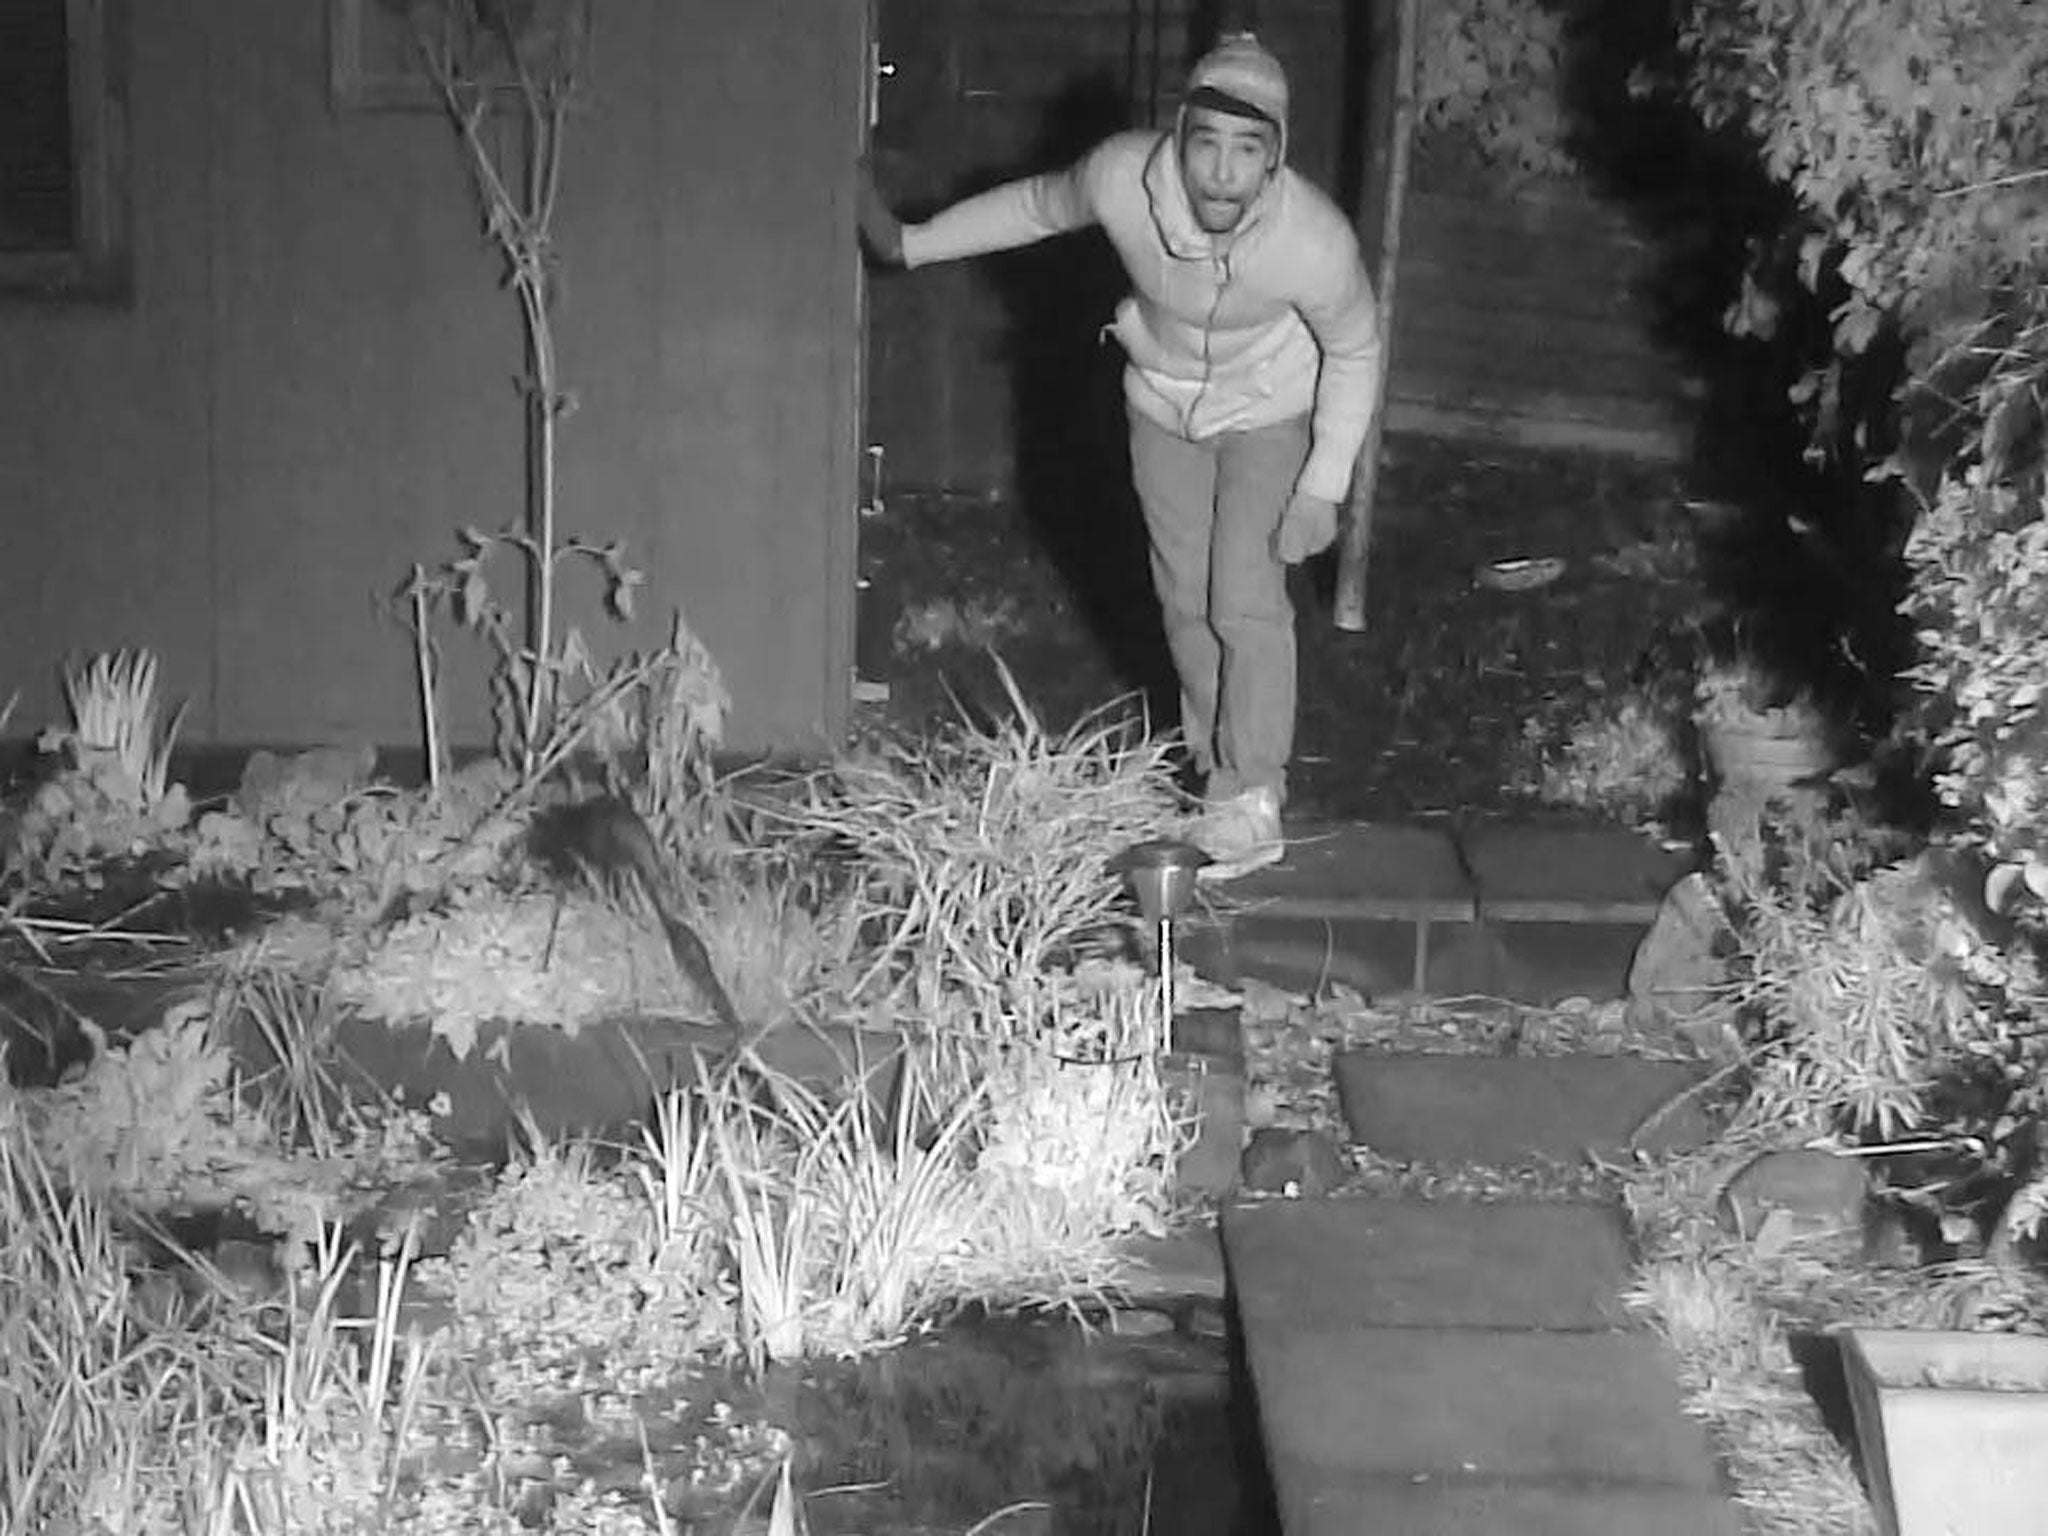 Police released this image, captured by Simon King's 'Fox Family Cam', and said they would like to speak to man in connection with a burglary investigation